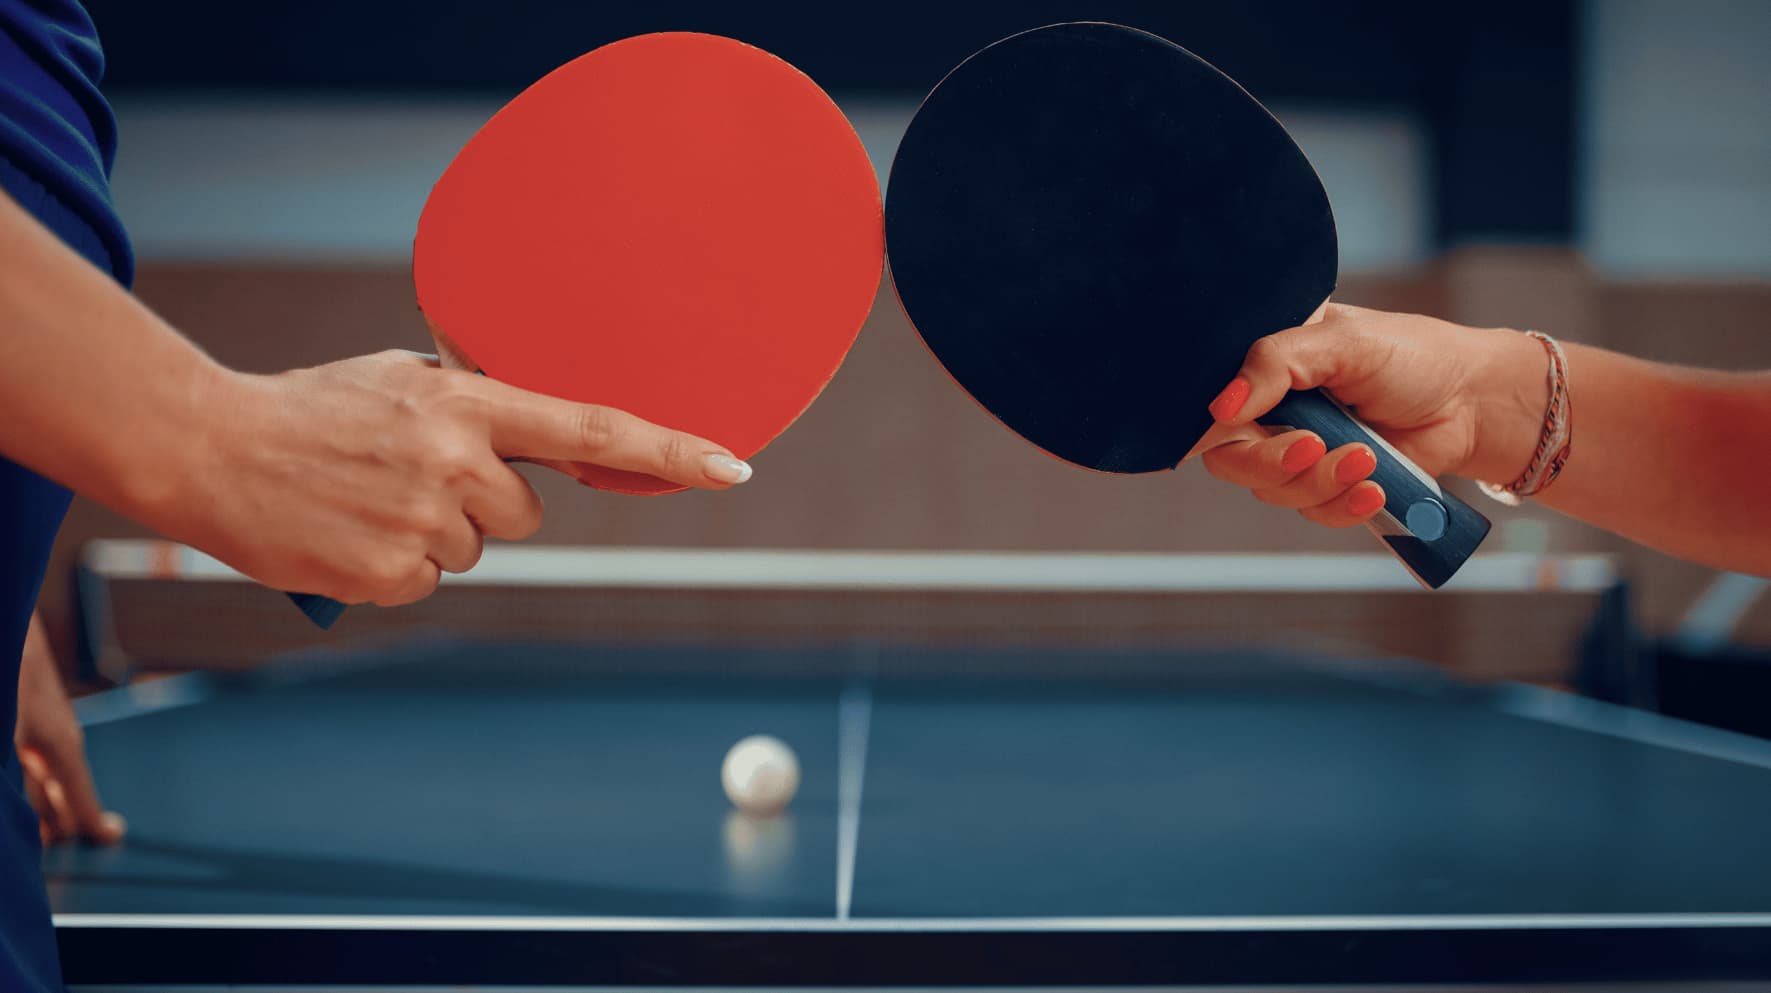 Unusual Facts about Table Tennis Equipment